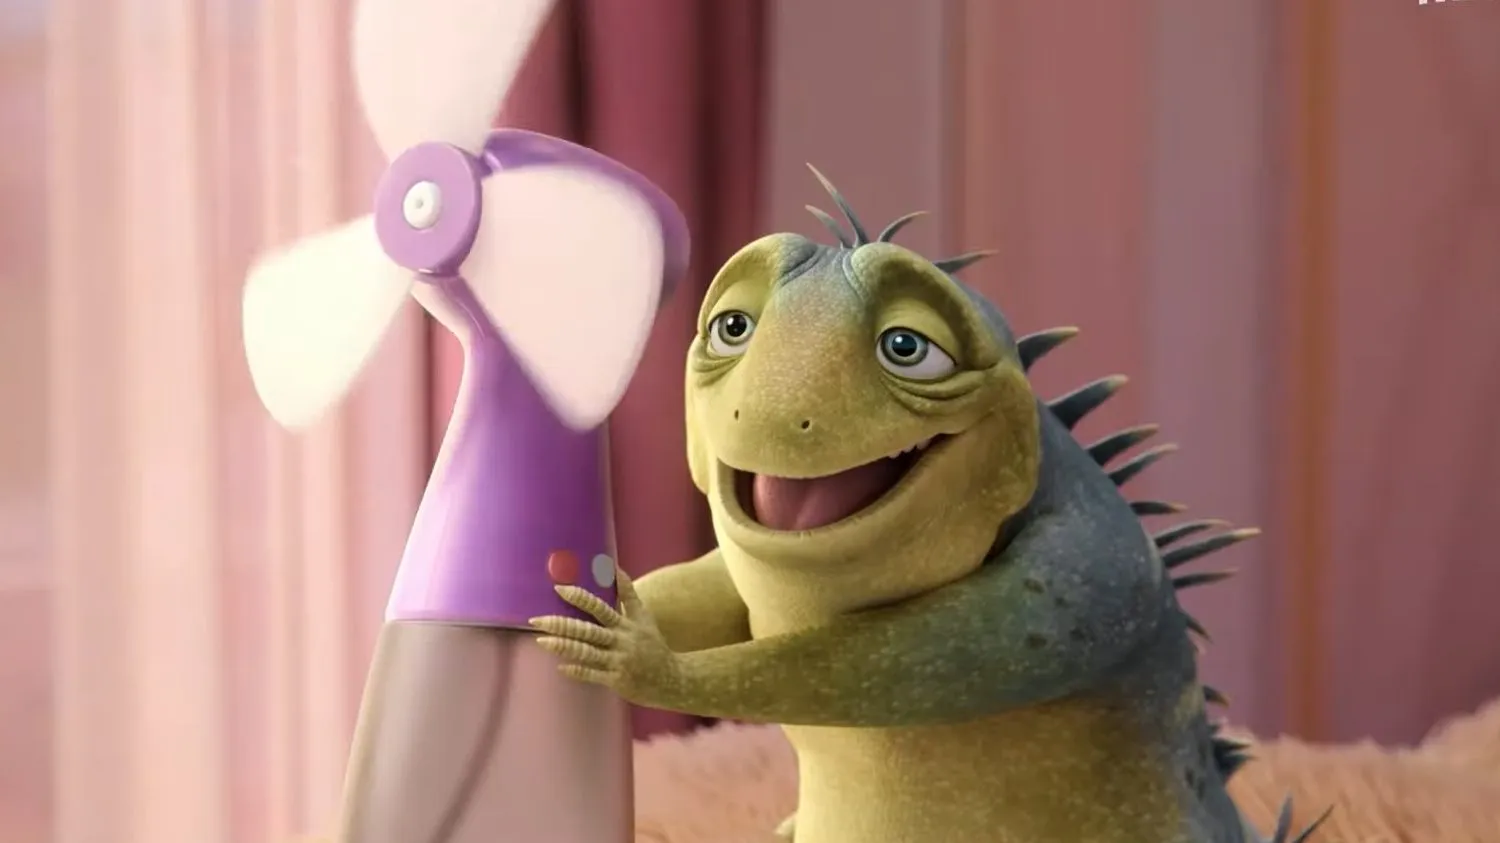 Leo Trailer: Adam Sandler is a 74-year-old Lizard in Netflix’s Animated Comedy